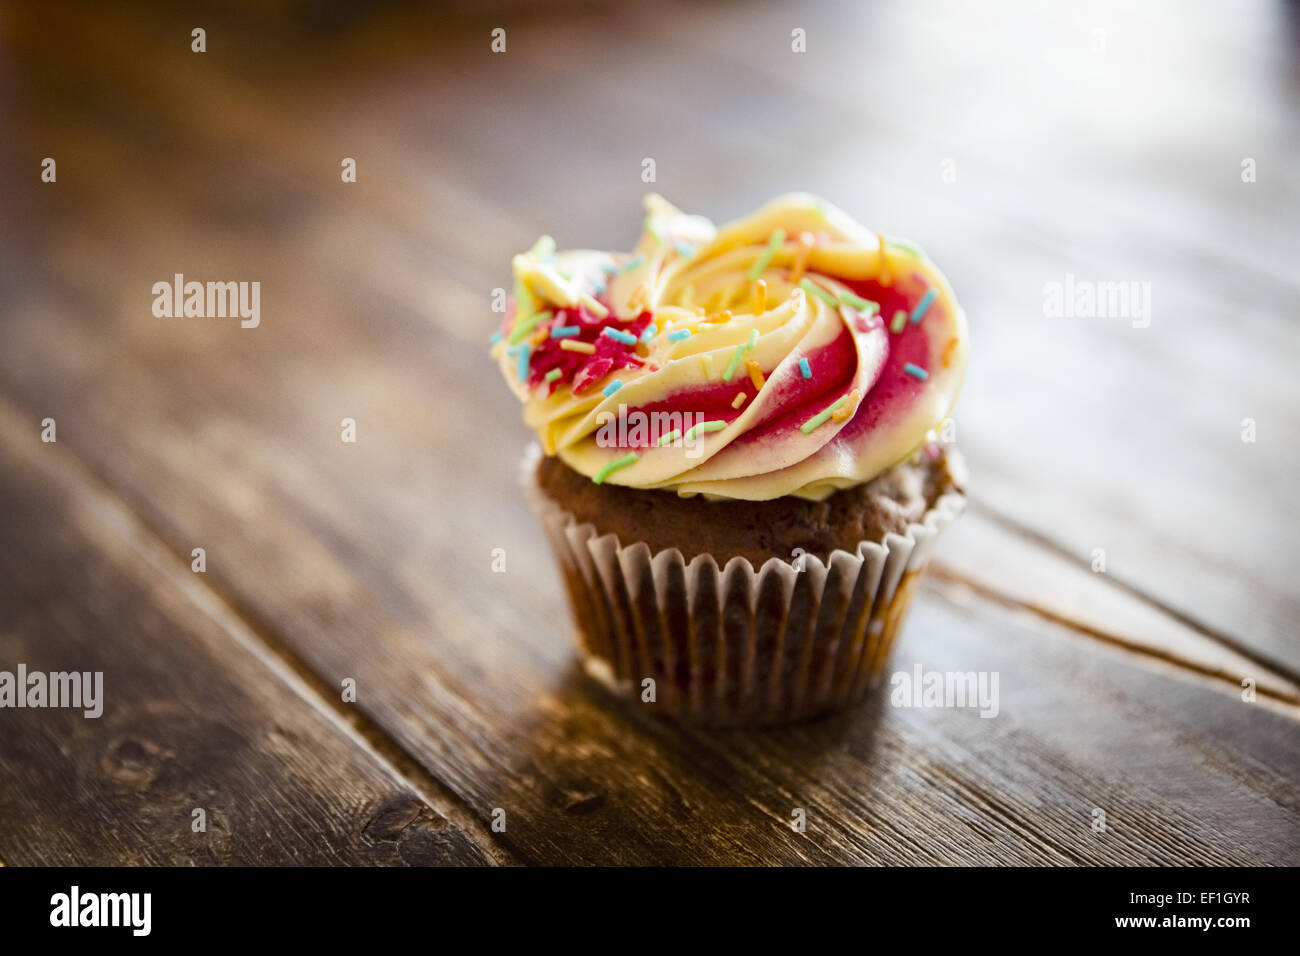 Sweet and tasteful cup cake with chocolate. and sprikles Stock Photo